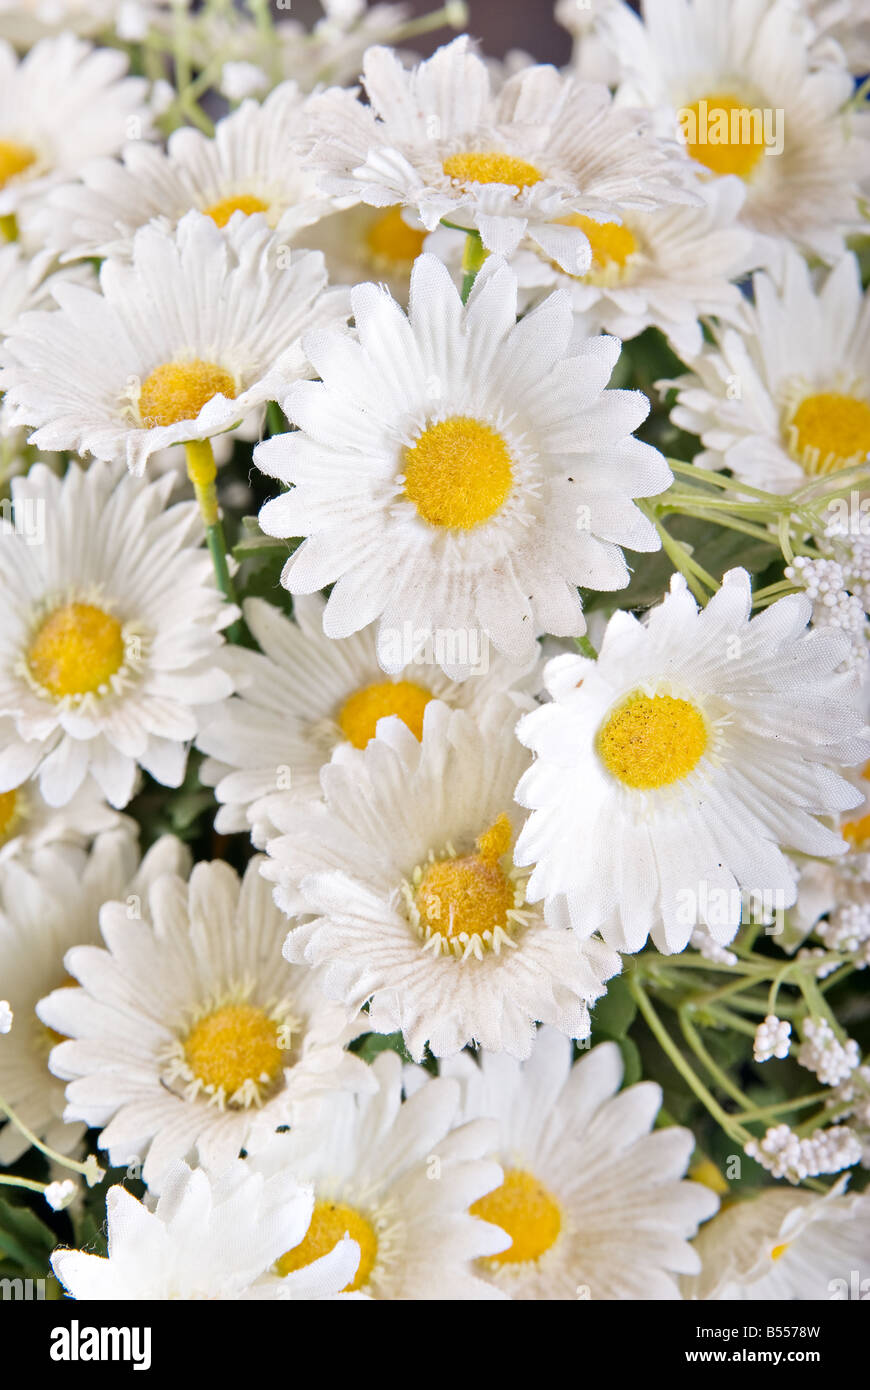 great image of some white silk daisy flowers Stock Photo